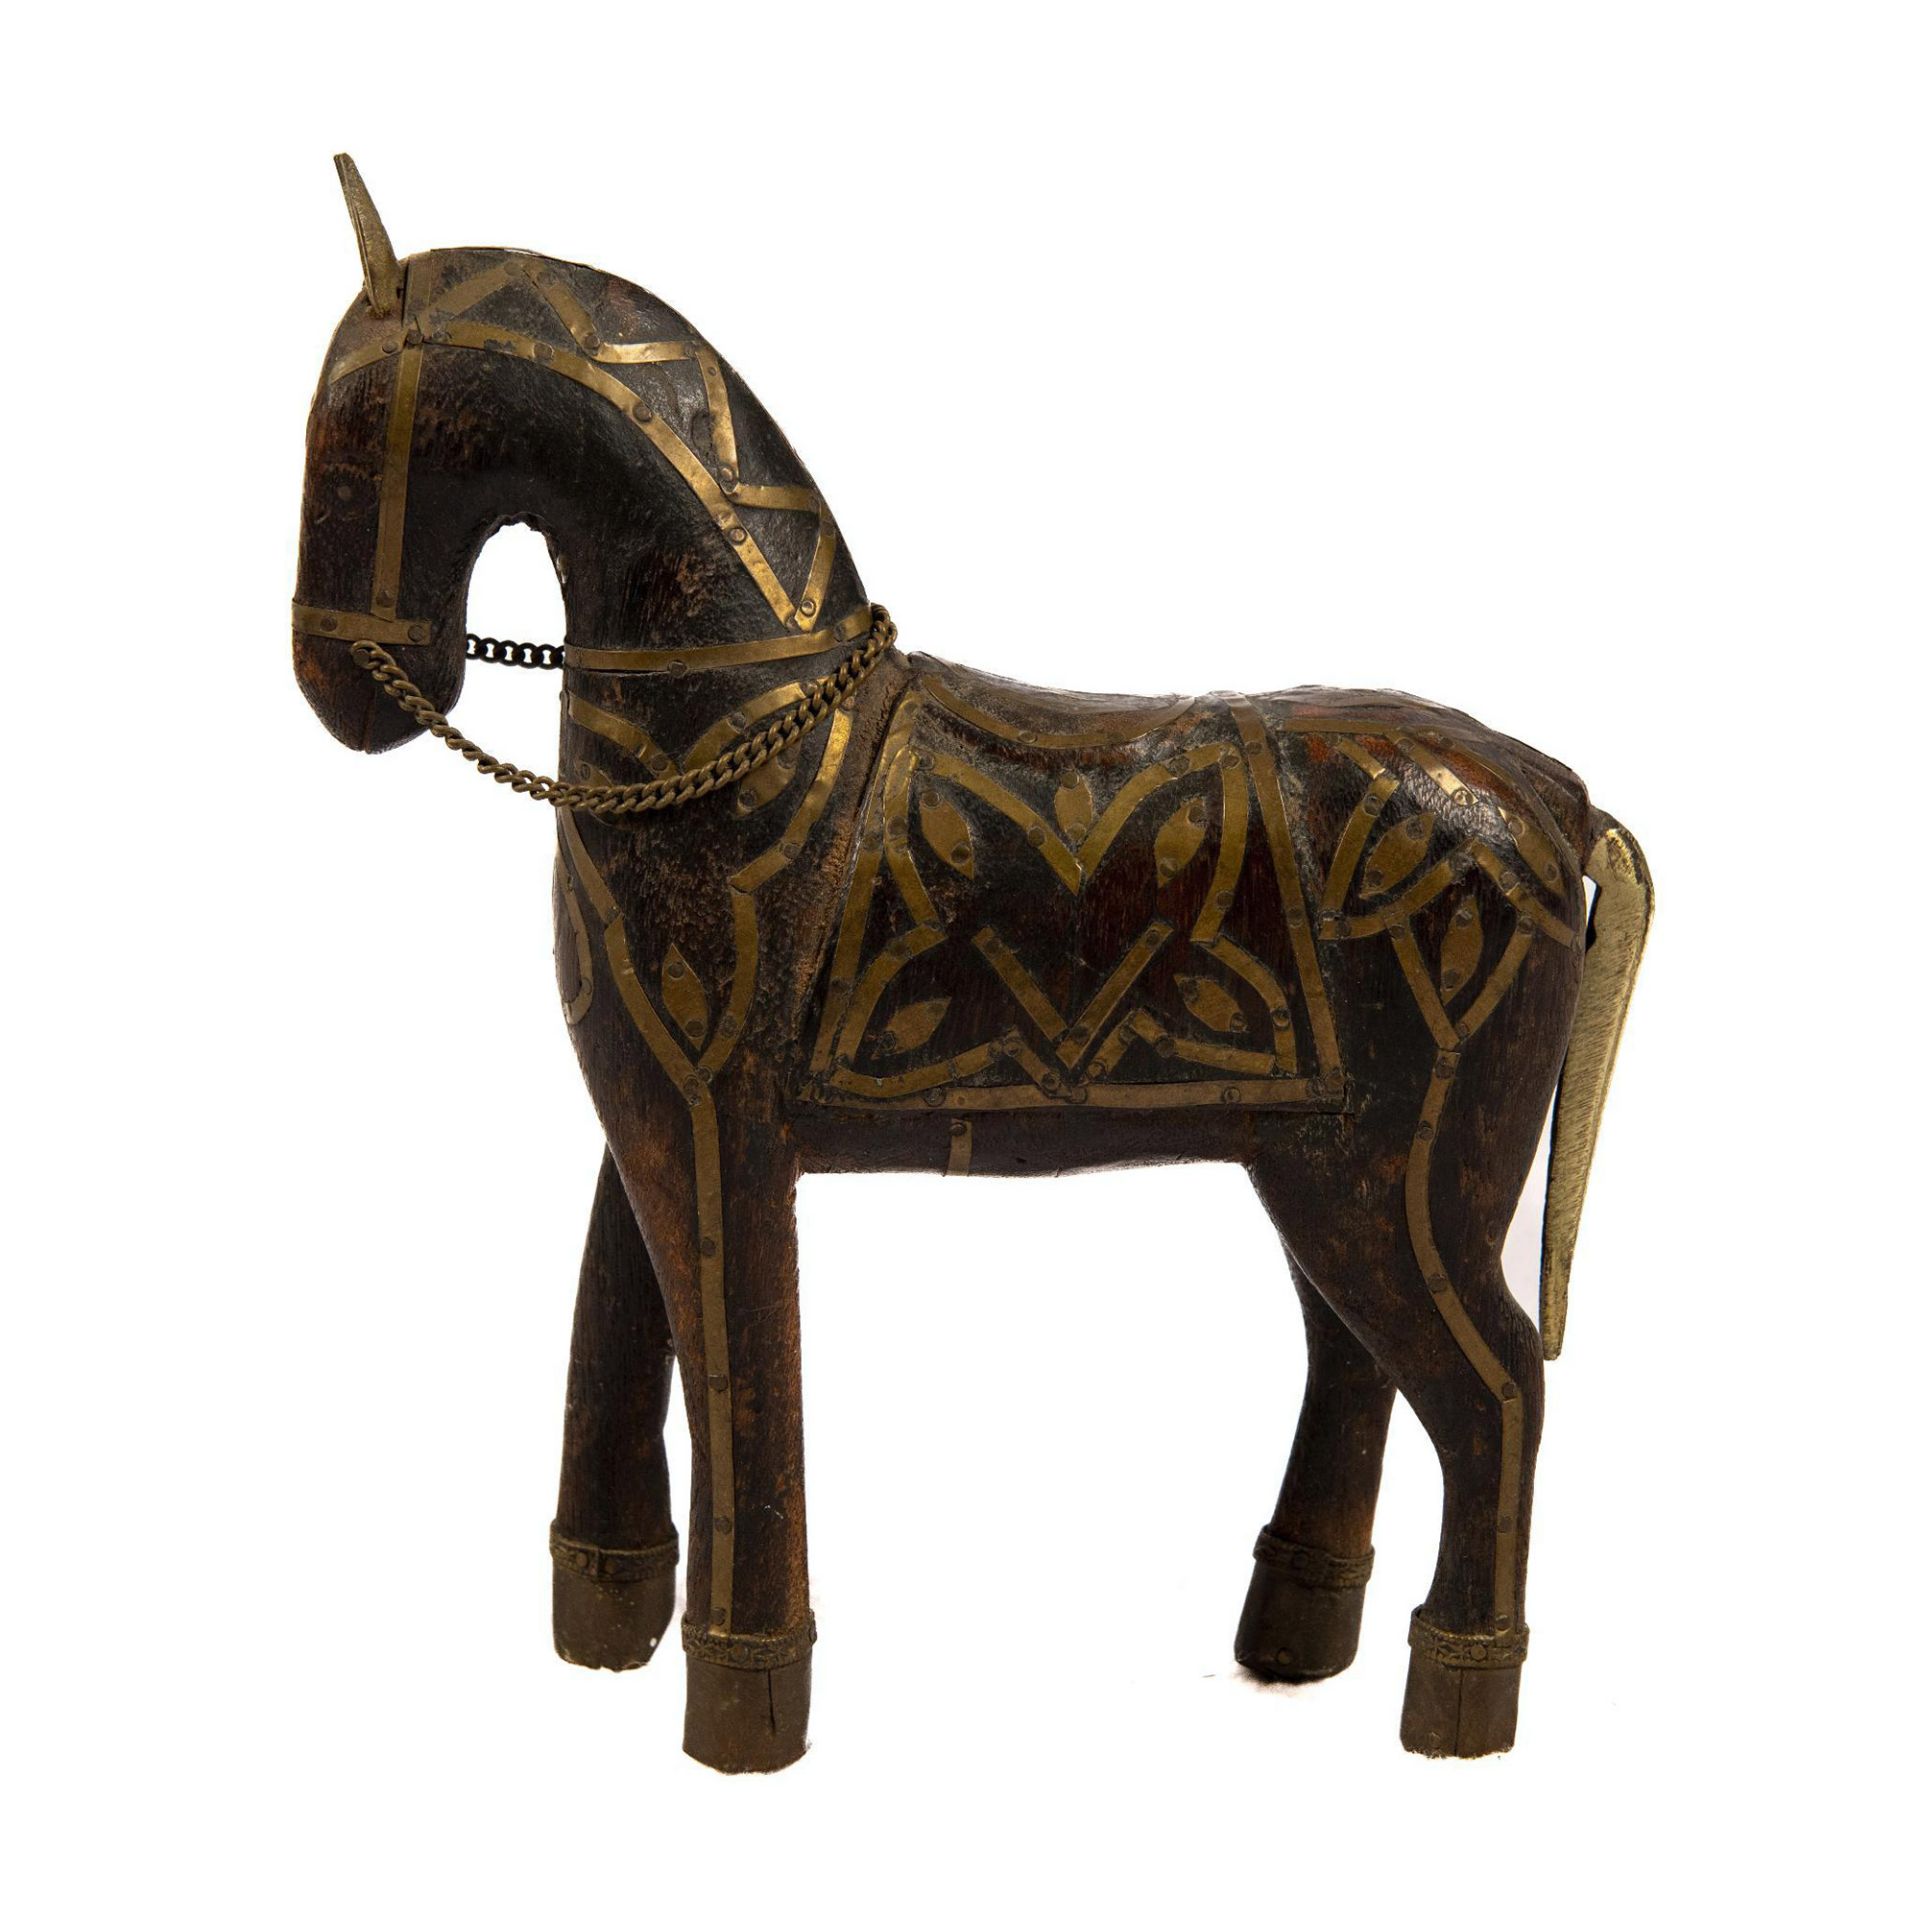 Rajasthani Indian Wooden War Horse, Brass Inlay - Image 2 of 4